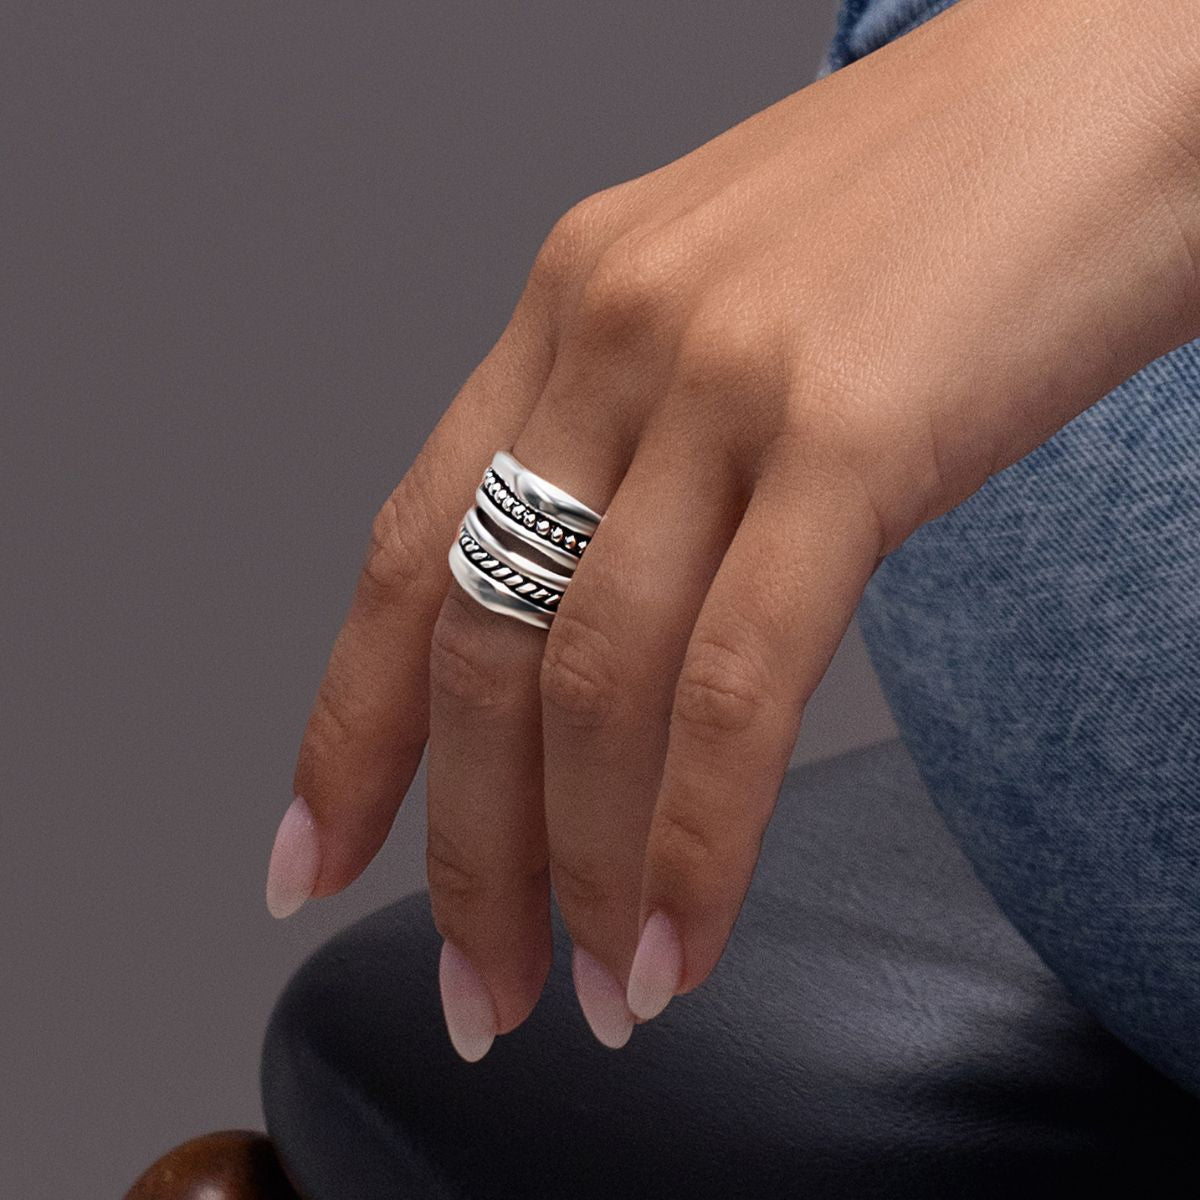 Wide Sterling Silver Rope Bead Ring